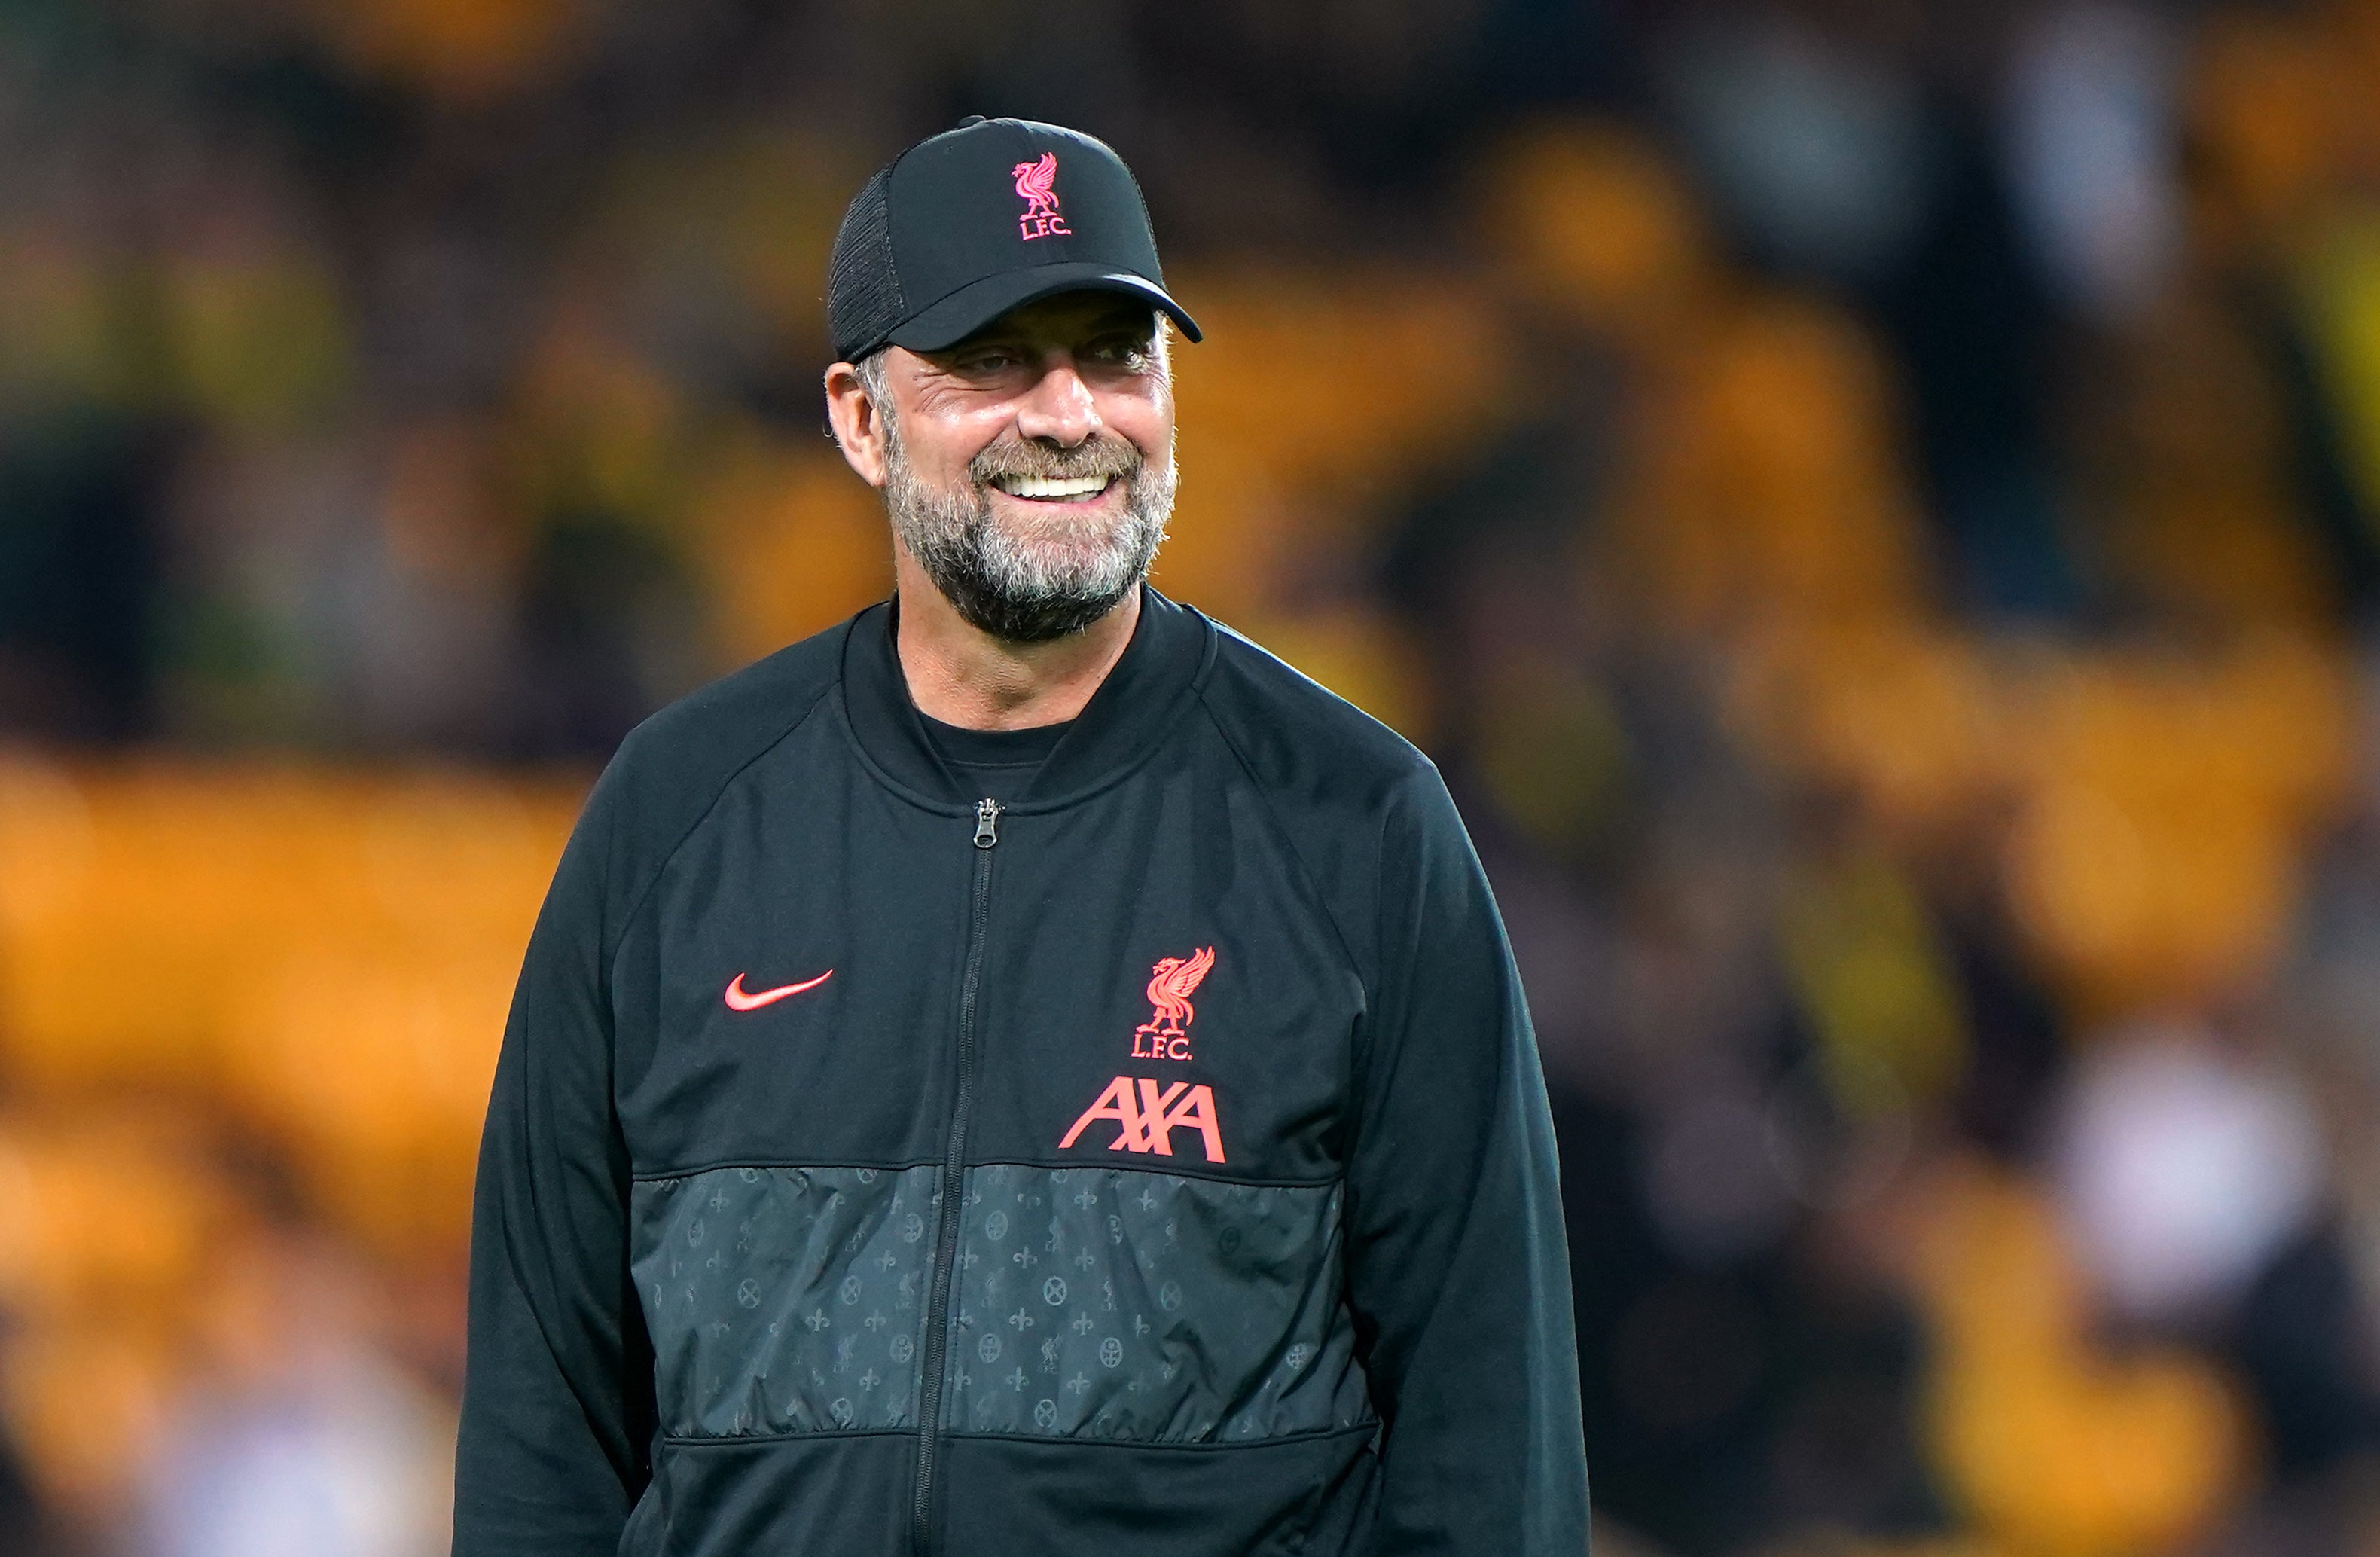 Jurgen Klopp was pleased with Liverpool’s 3-0 victory at Norwich in the Carabao Cup (Joe Giddens/PA)